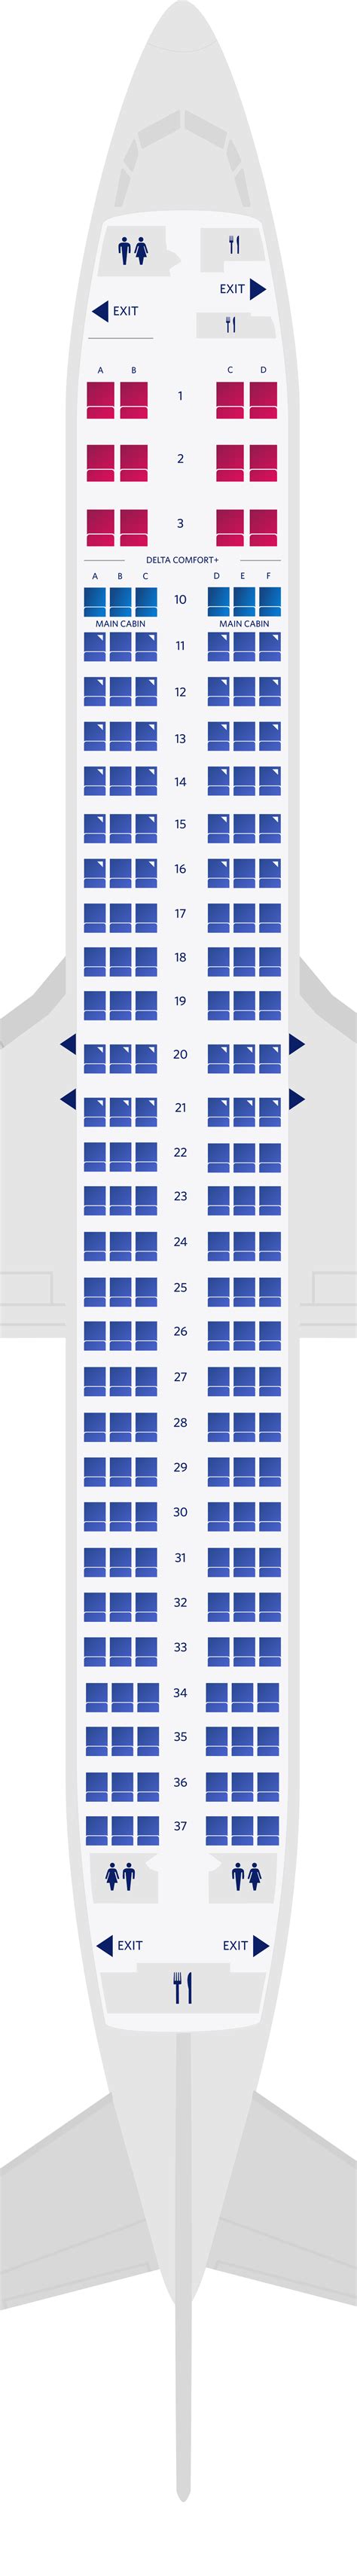  *Seat configuration may vary depending on aircraft type and size. There may be changes to Delta One seat configurations for Atlanta (ATL) - Santiago, Chile (SCL) starting July 1, 2022 and Atlanta (ATL) - Dublin, Ireland (DUB) starting August 8, 2022. . 